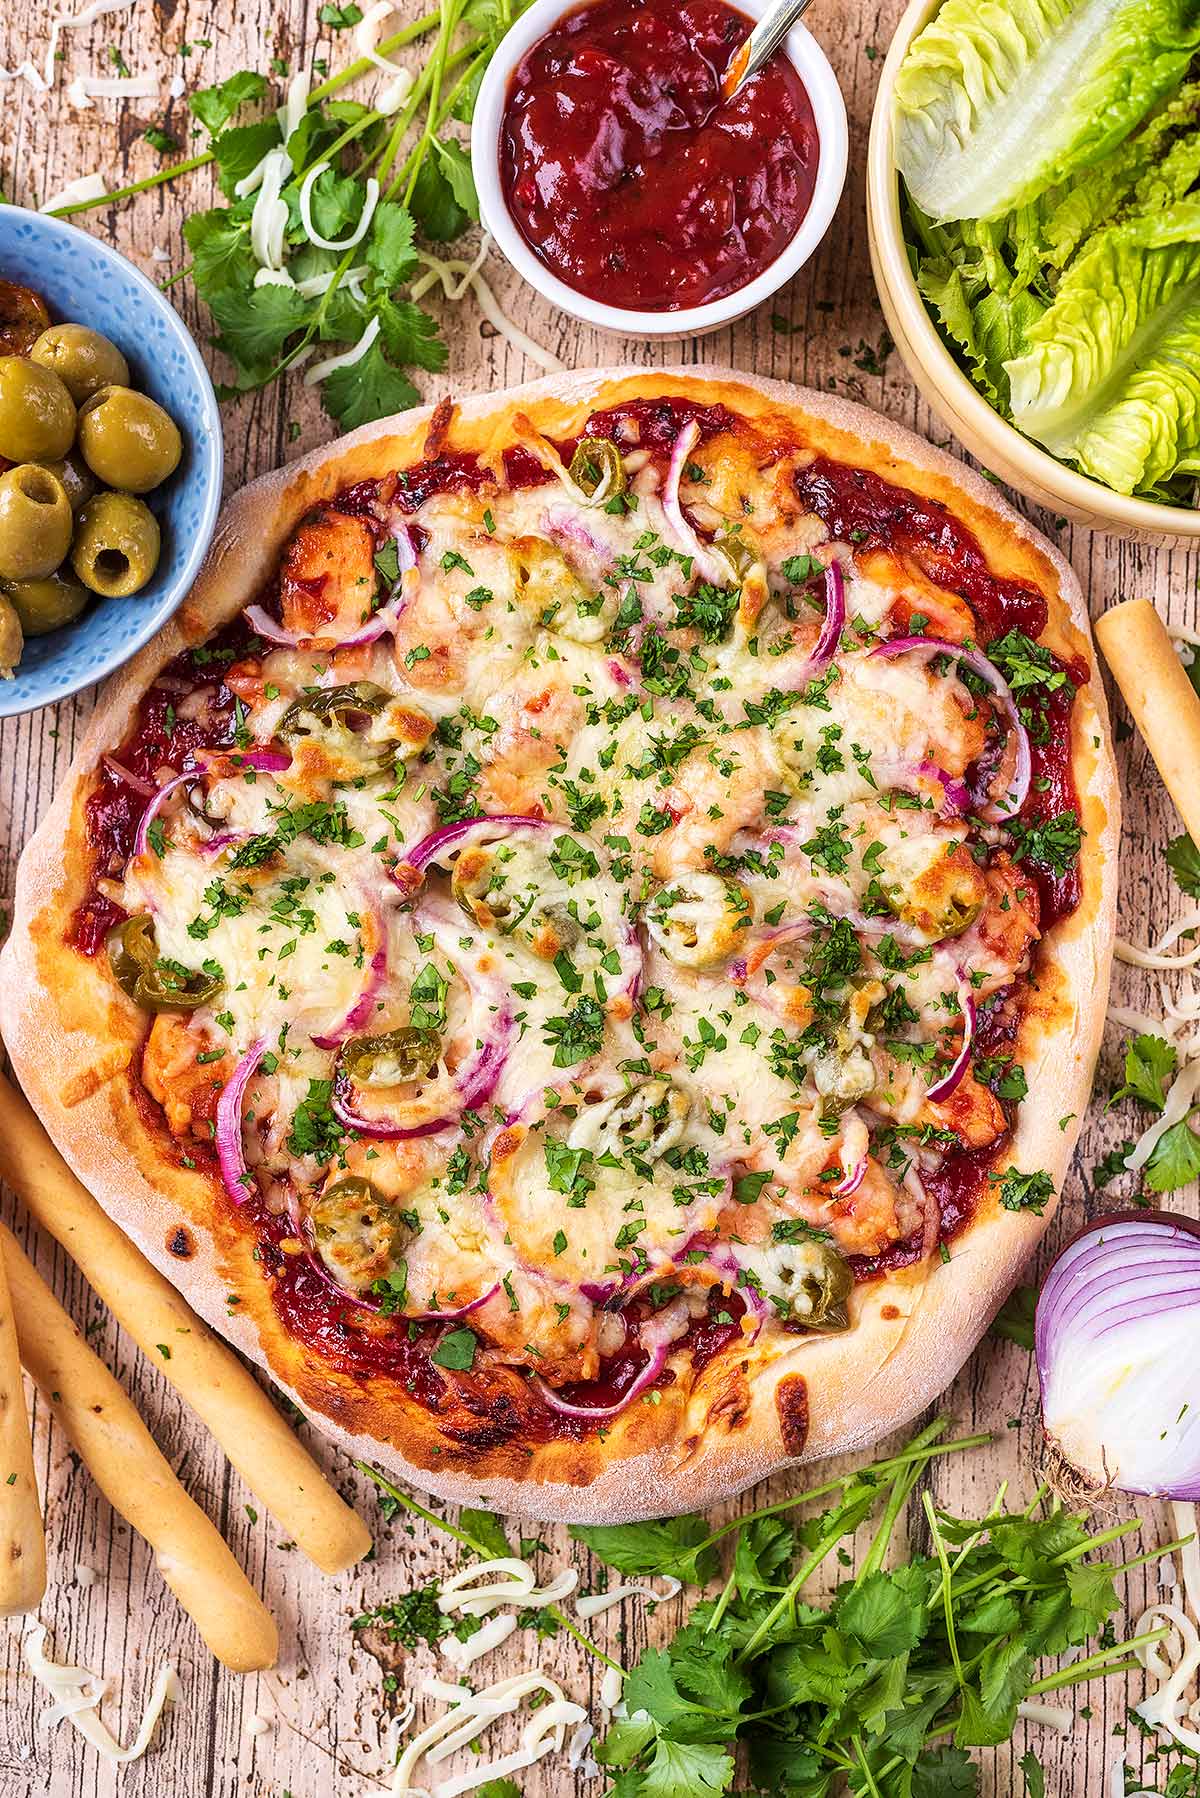 A thick crust pizza surrounded by salad, olives, bread sticks, herbs and dip.